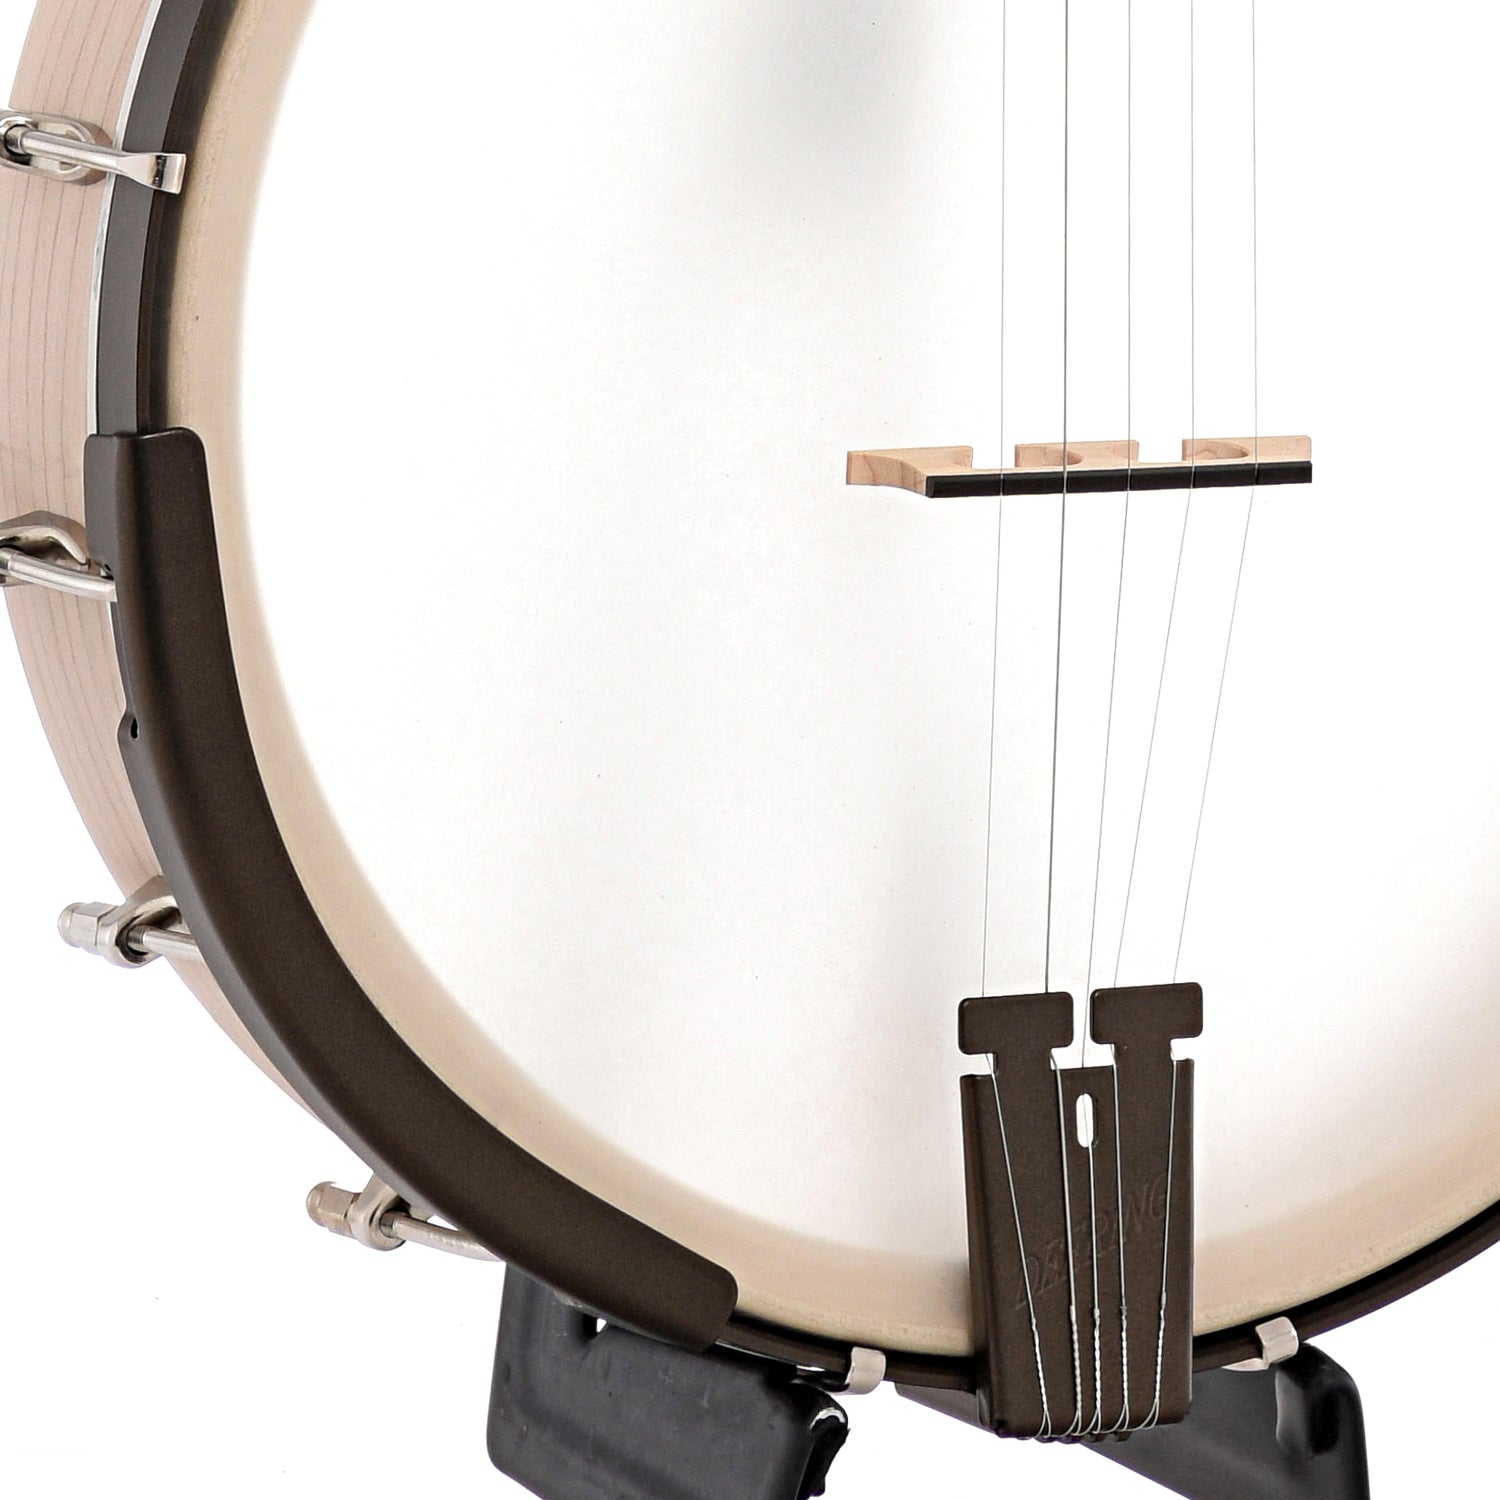 Armrest, bridge and tailpiece of Deering Goodtime Americana Limited Edition Bronze 12" Openback Banjo with Scooped Fretboard